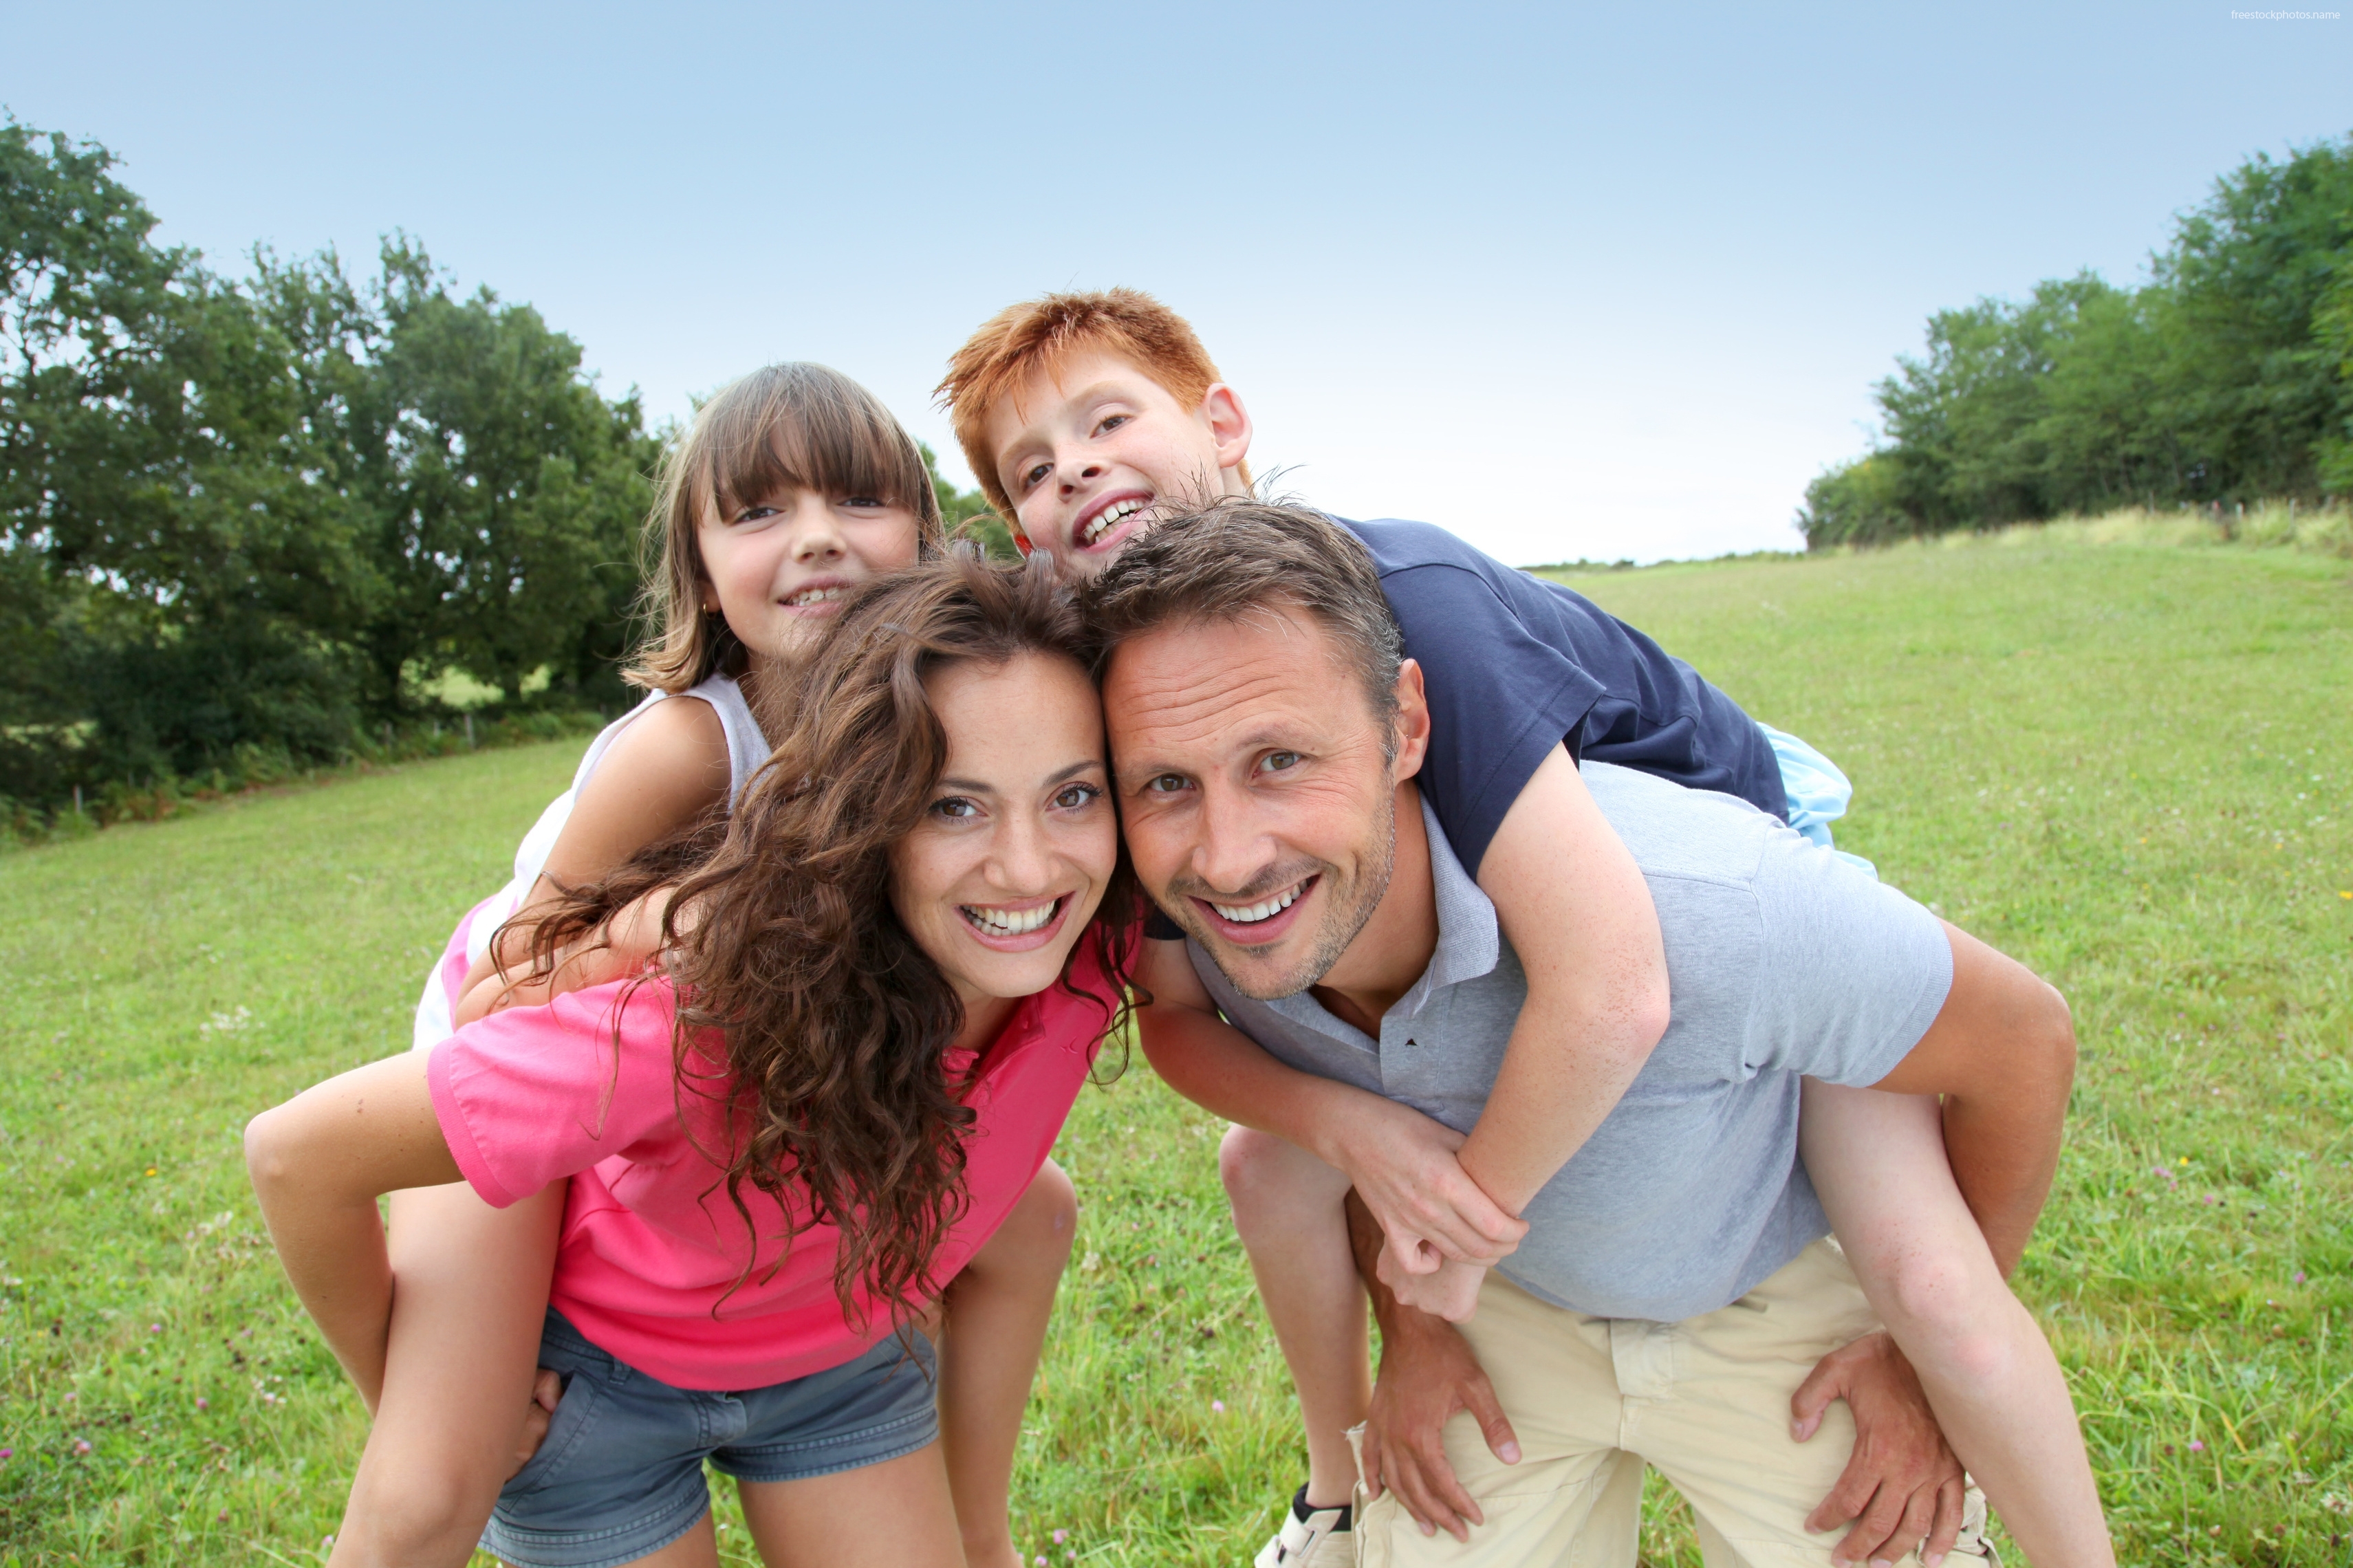 Stock Photos Of Family Health Image Photography Royalty